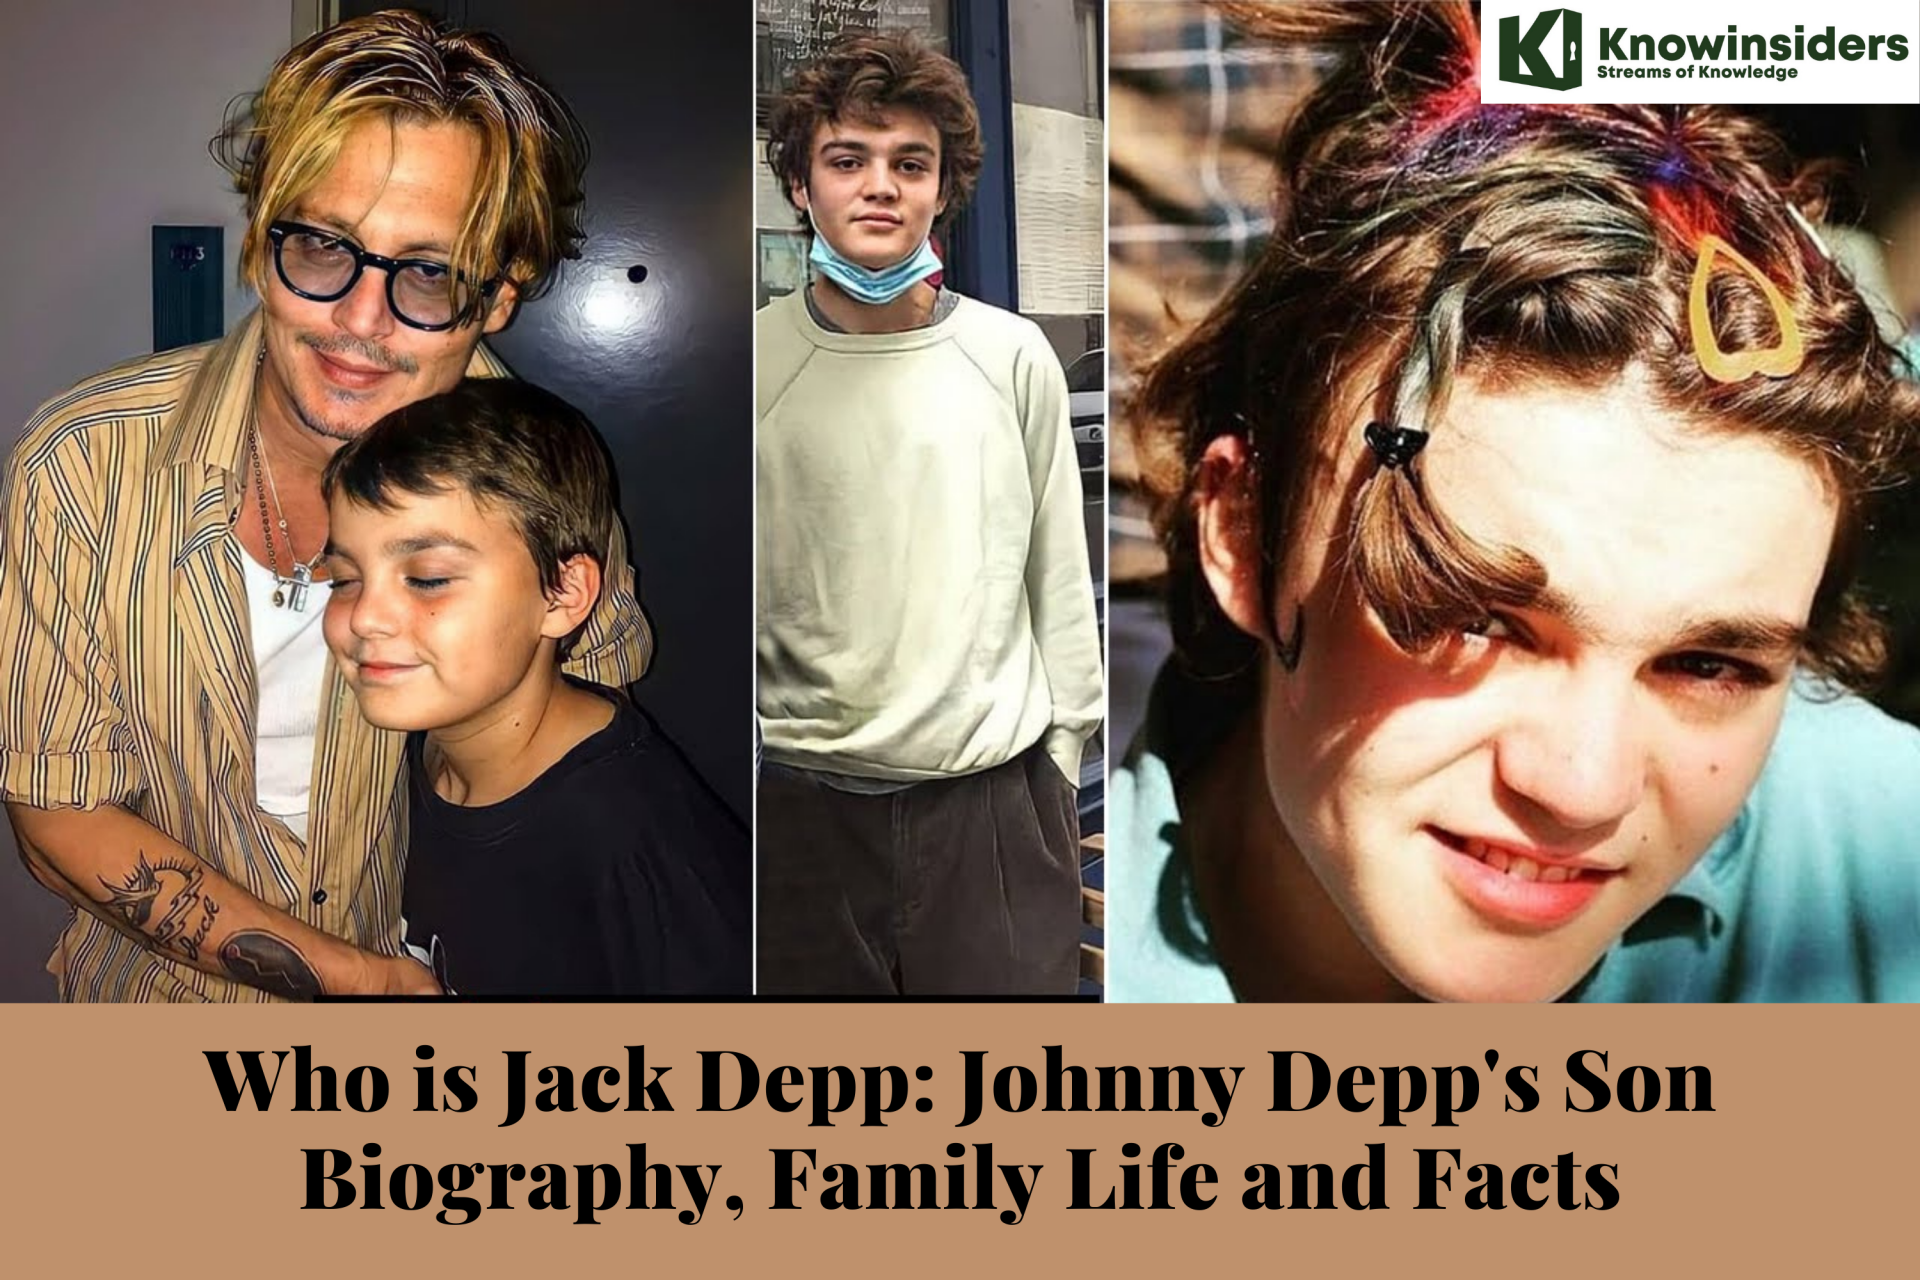 Who is Jack Depp: Johnny Depp's Son Biography, Family Life and Facts